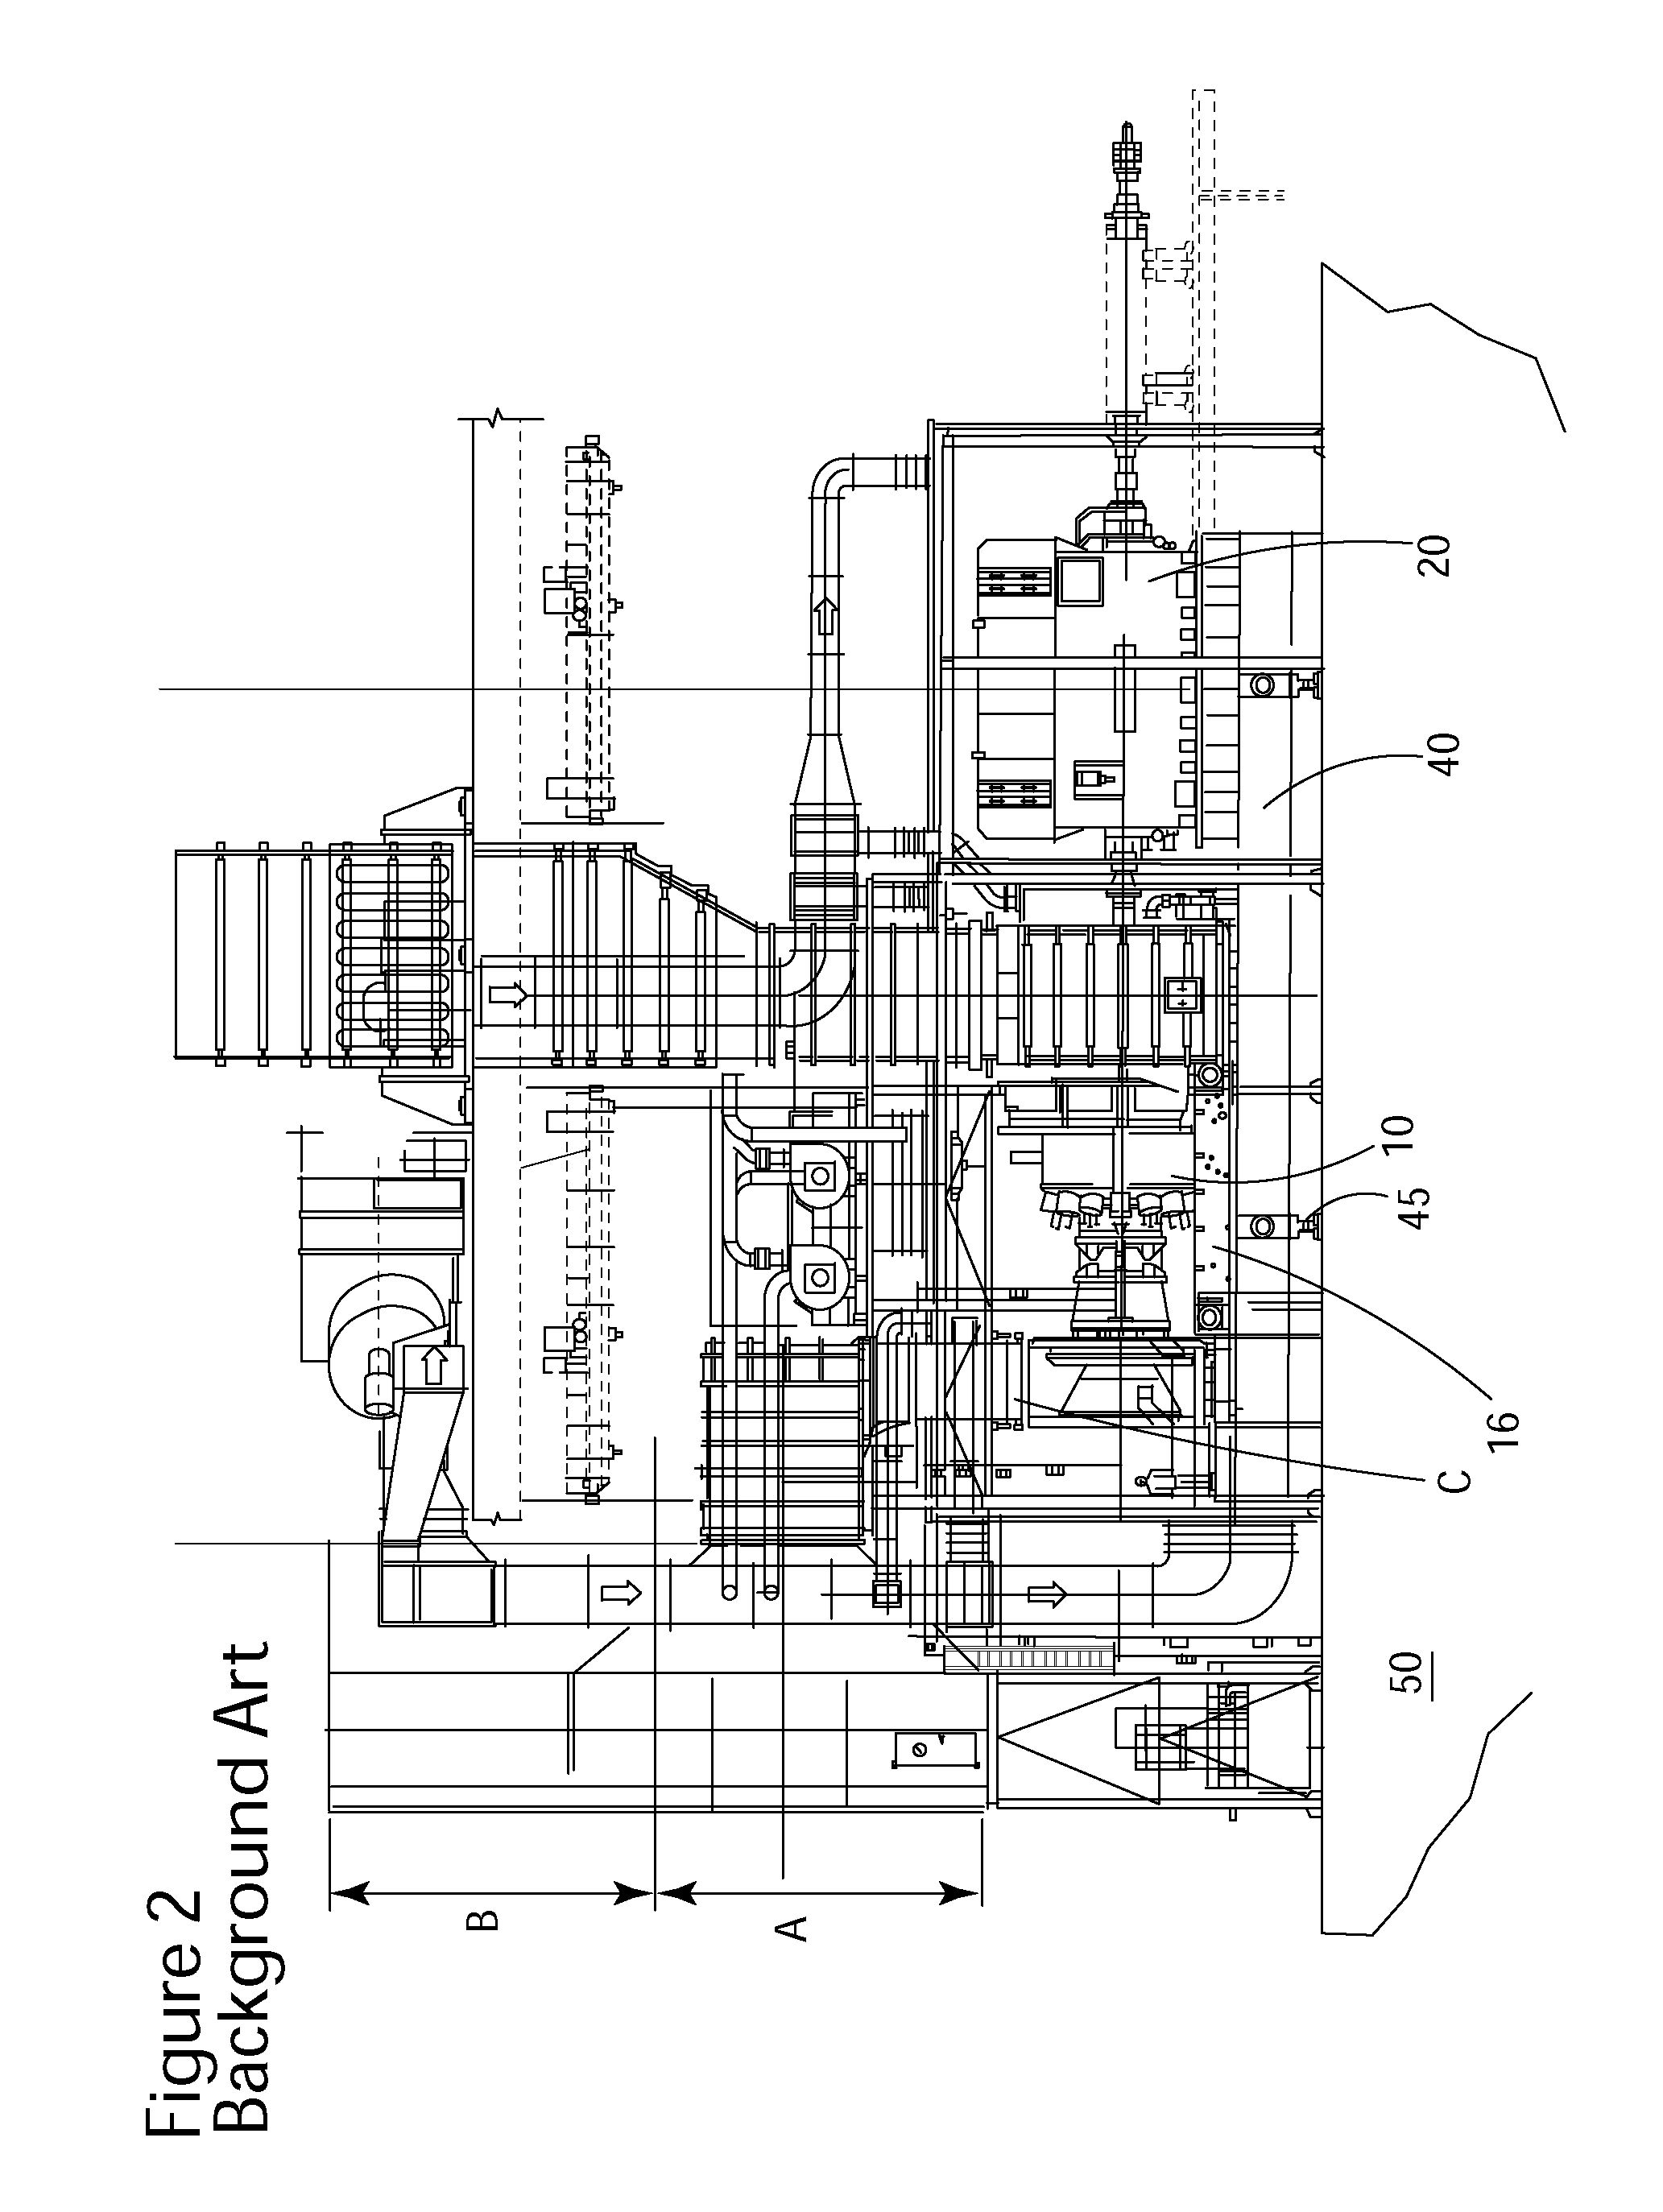 Method for moving and aligning heavy device